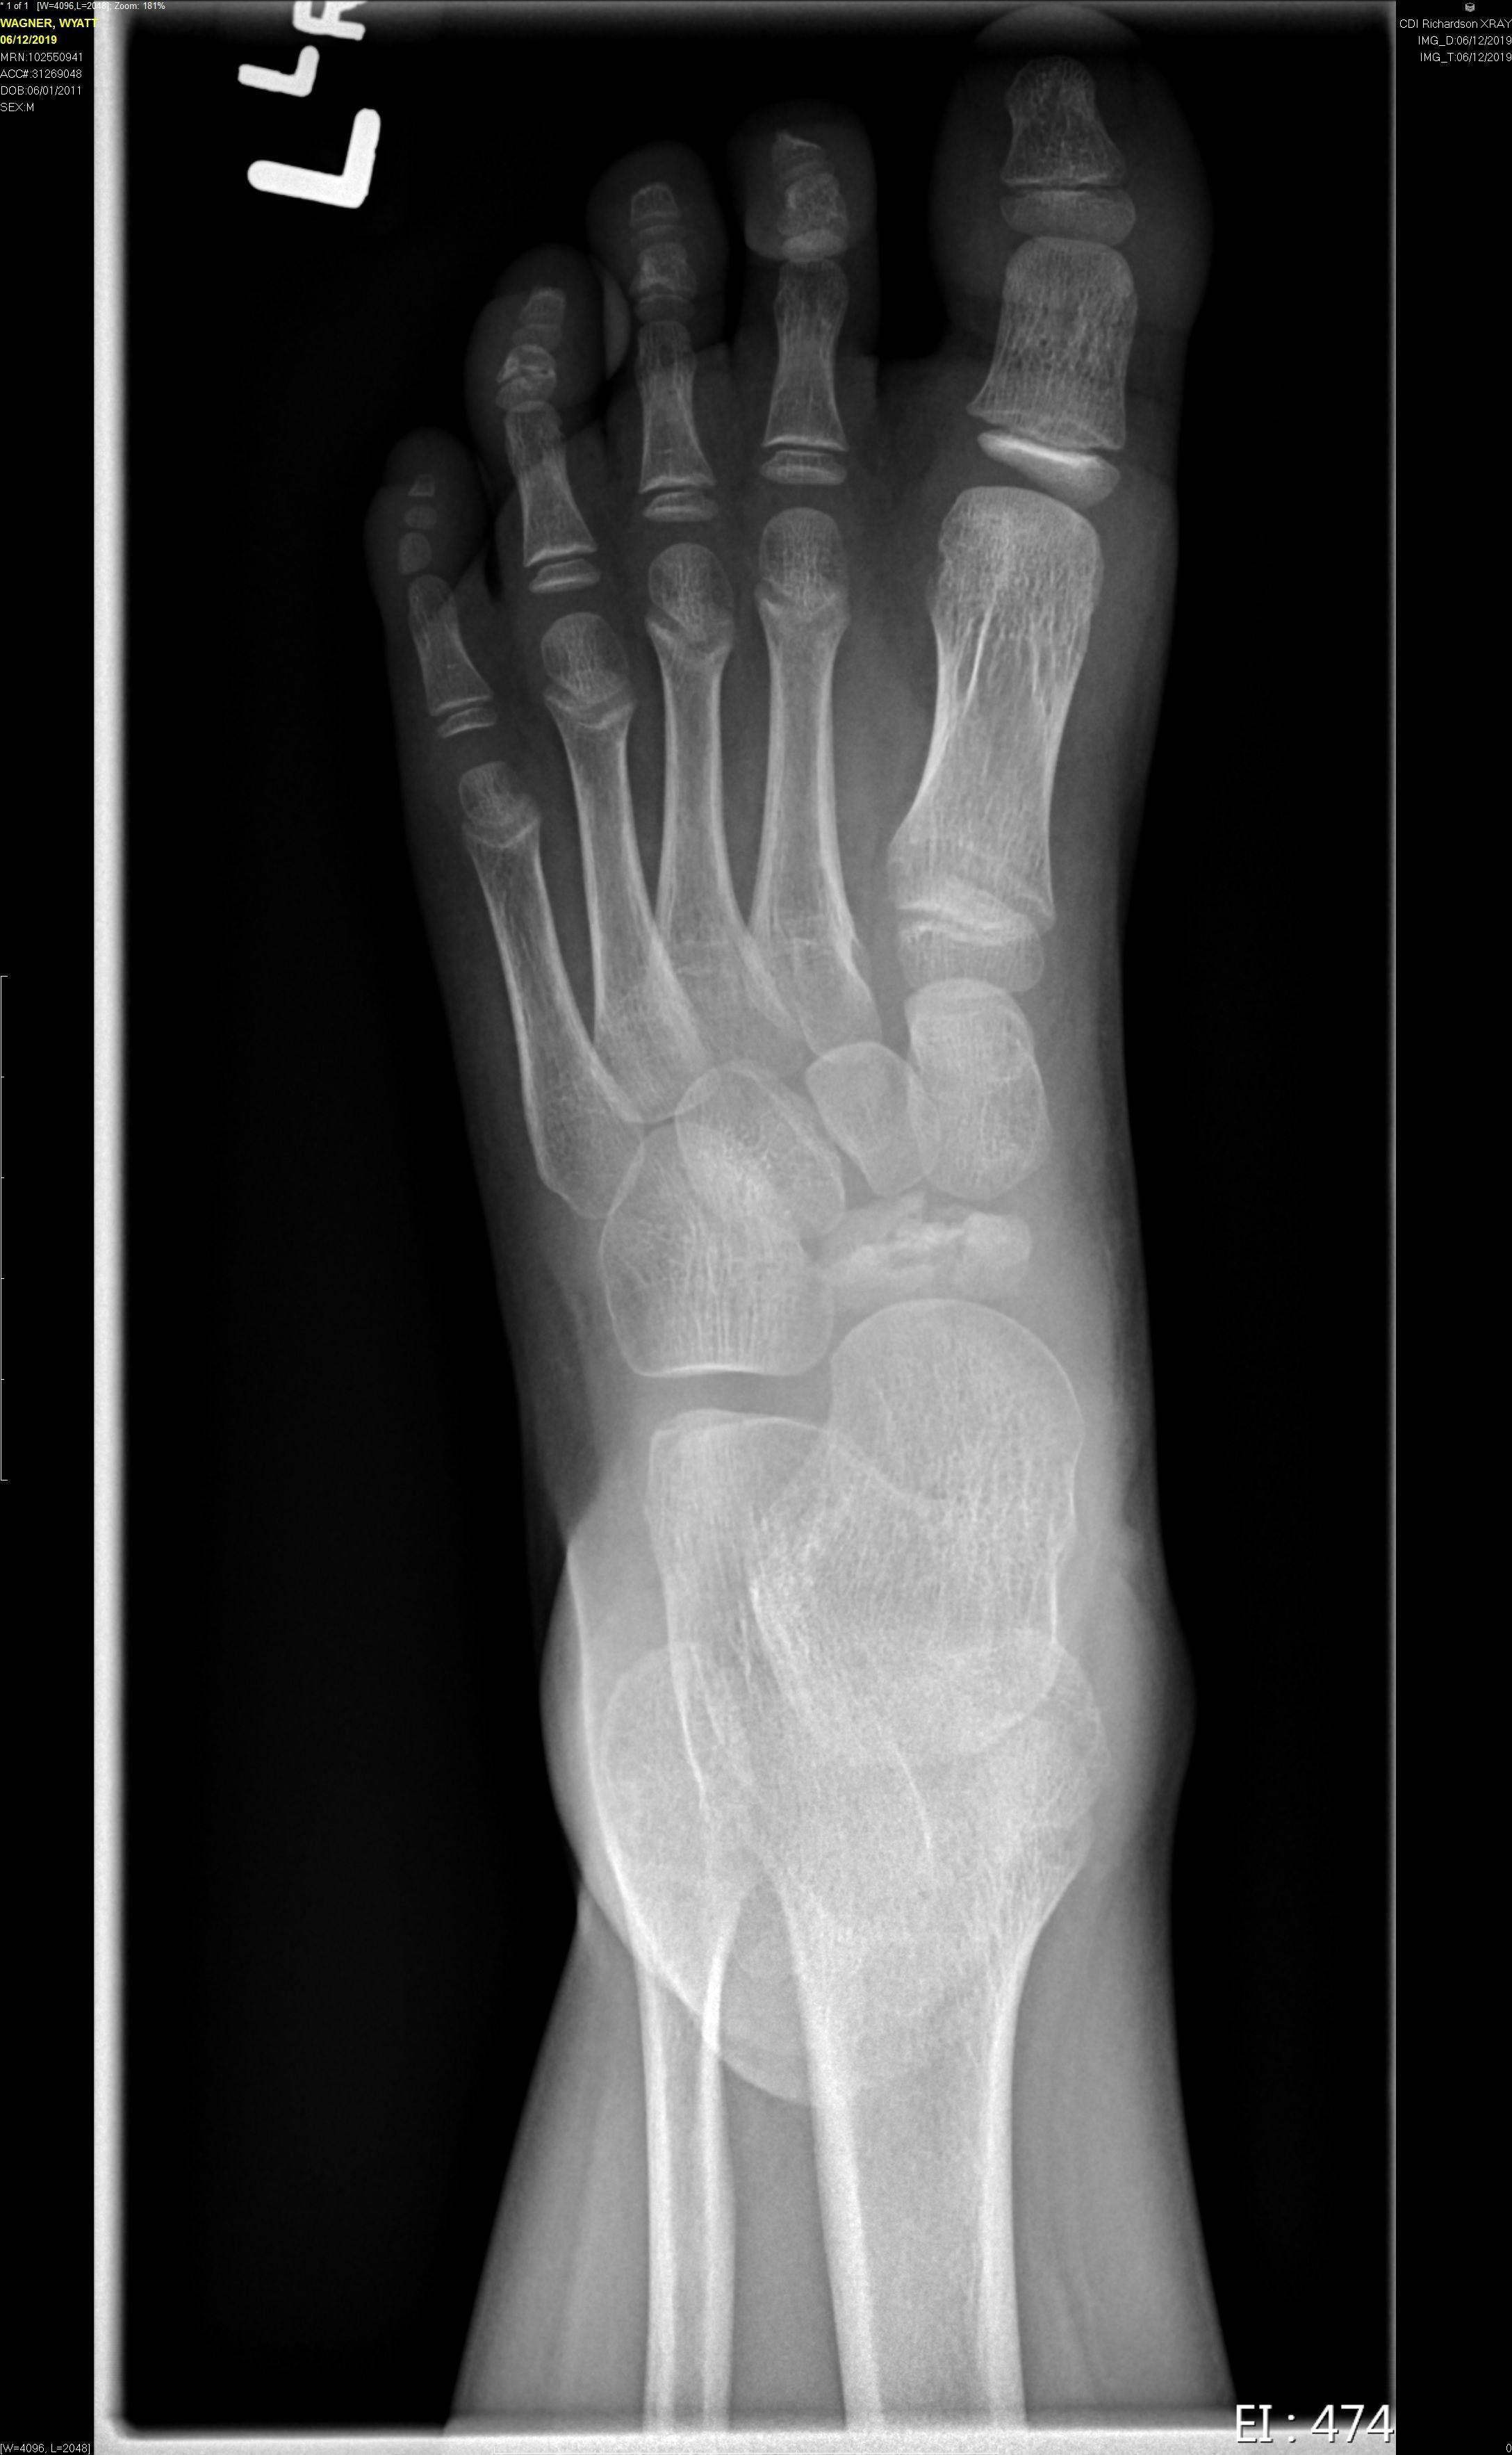 Image IQ Quiz: Pediatric Patient Presents with Foot Finding